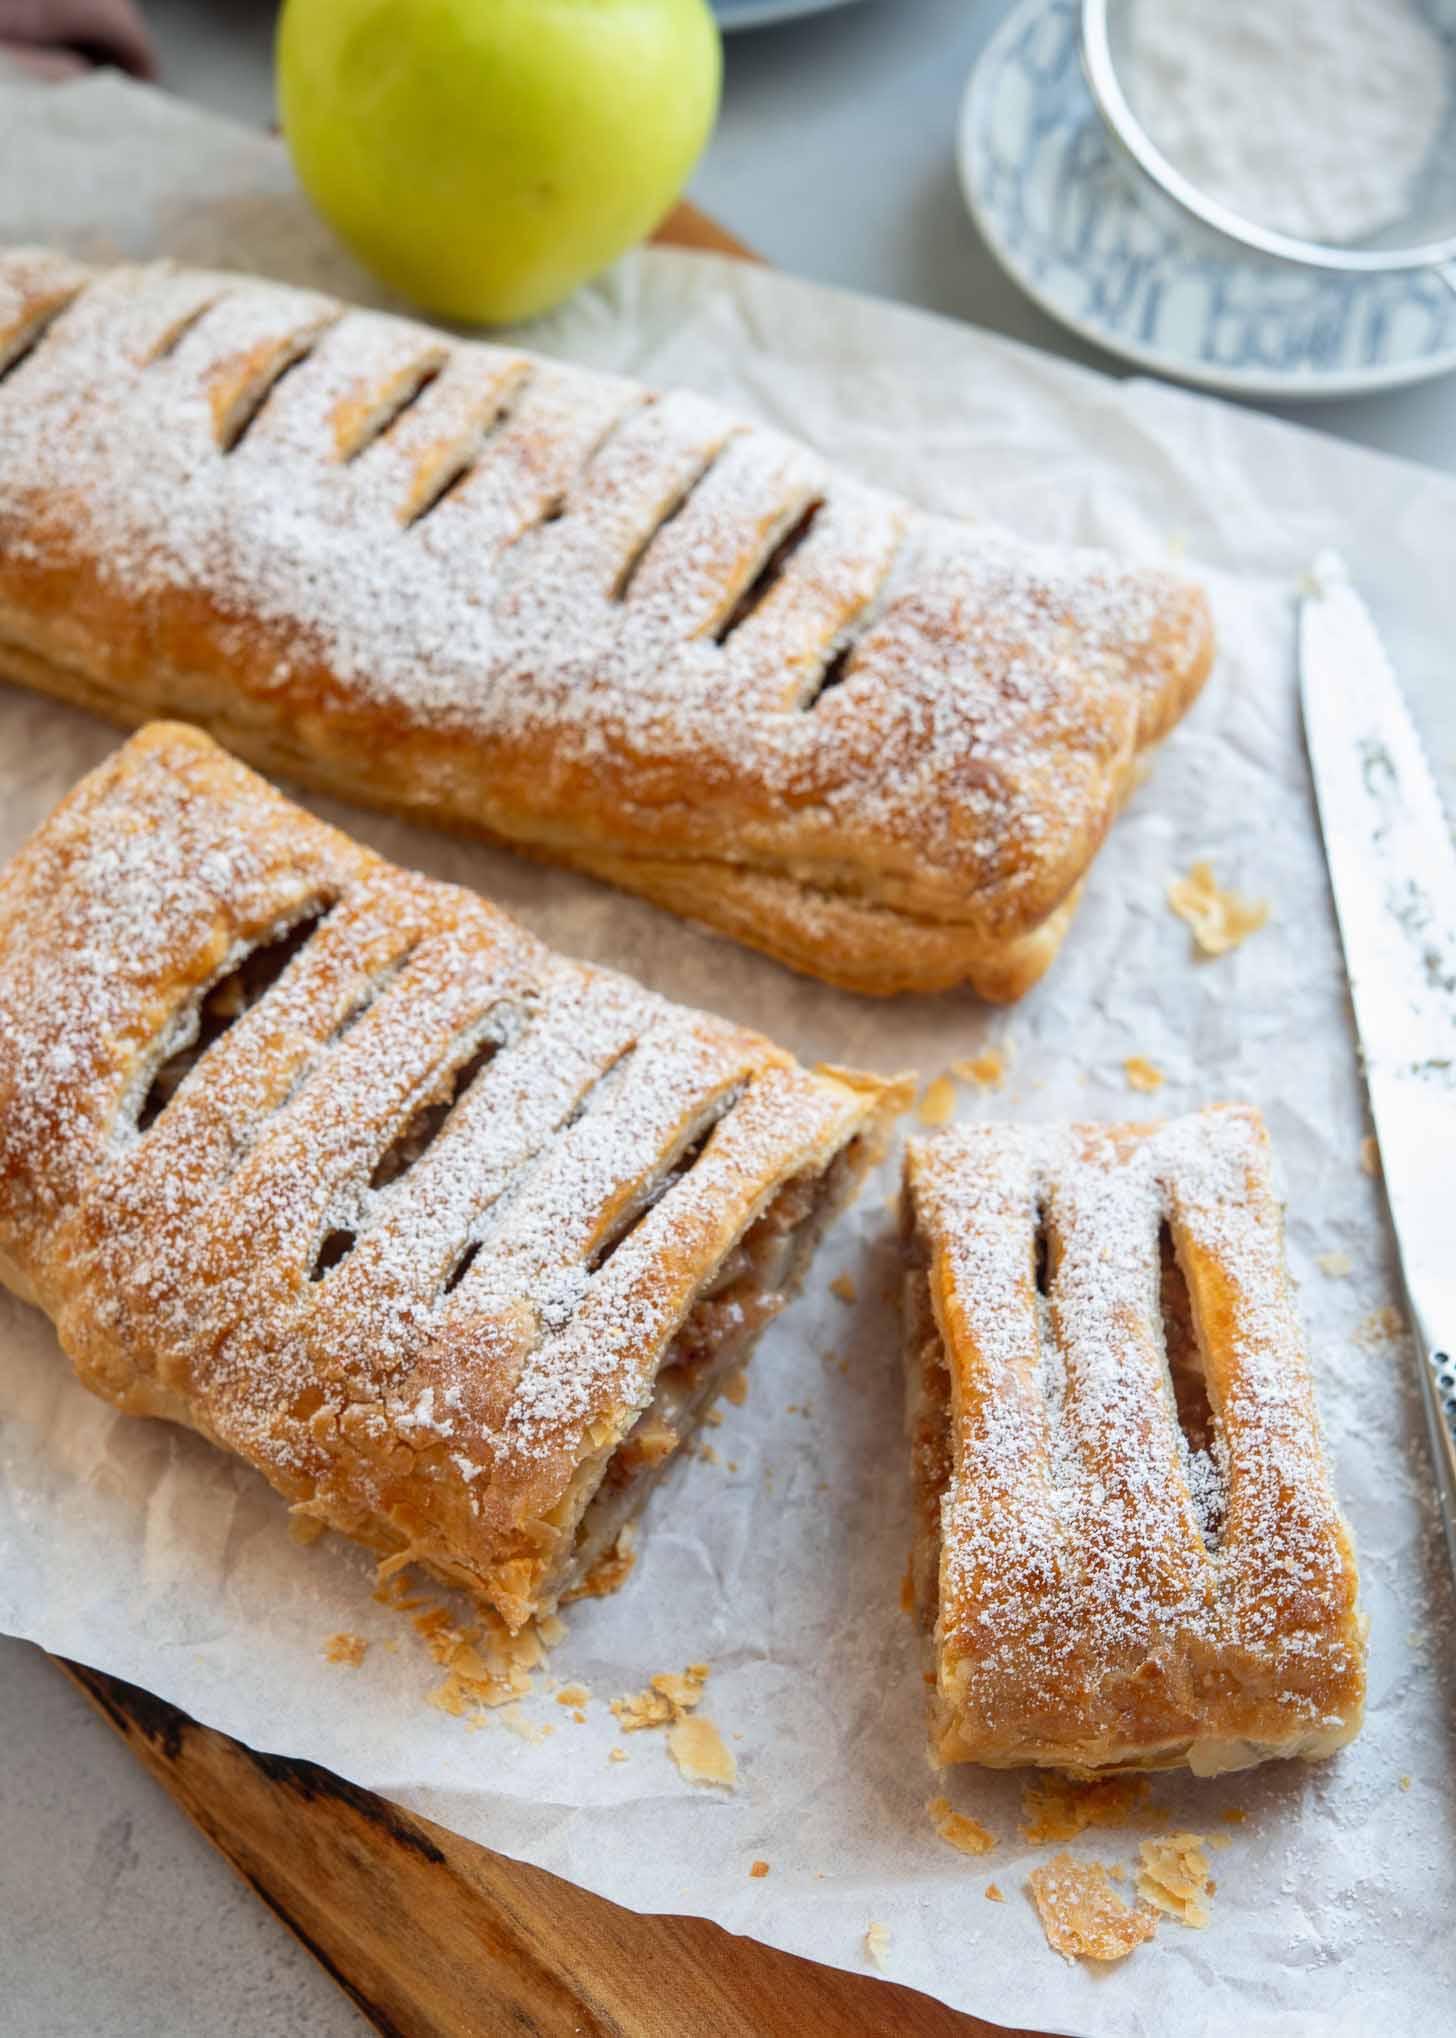 Puff pastry apple strudel dusted with powdered sugar and sliced.